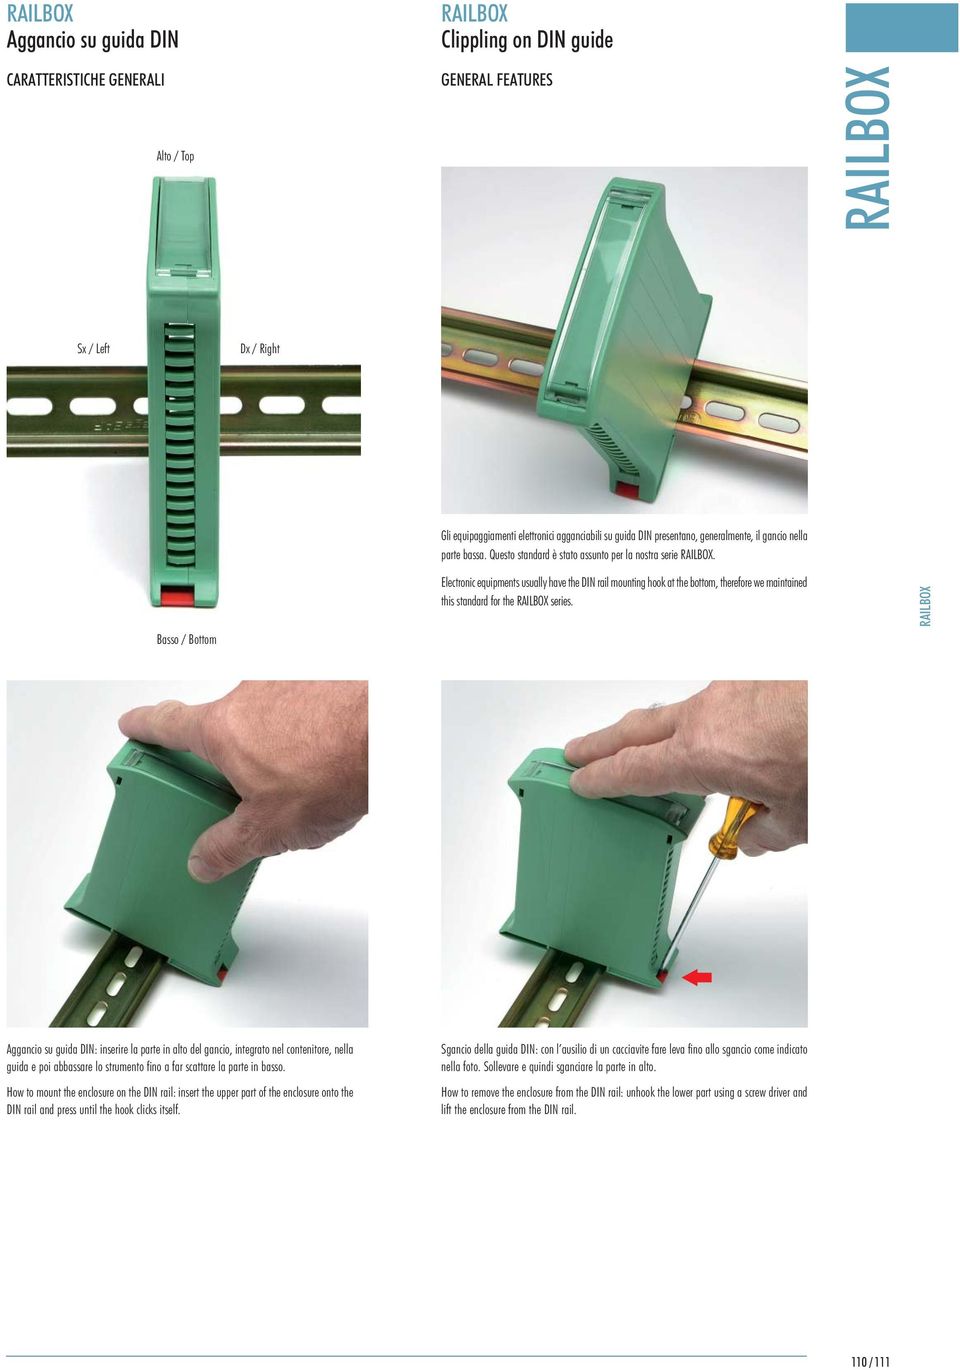 How to mount the enclosure on the DIN rail: insert the upper part of the enclosure onto the DIN rail and press until the hook clicks itself.